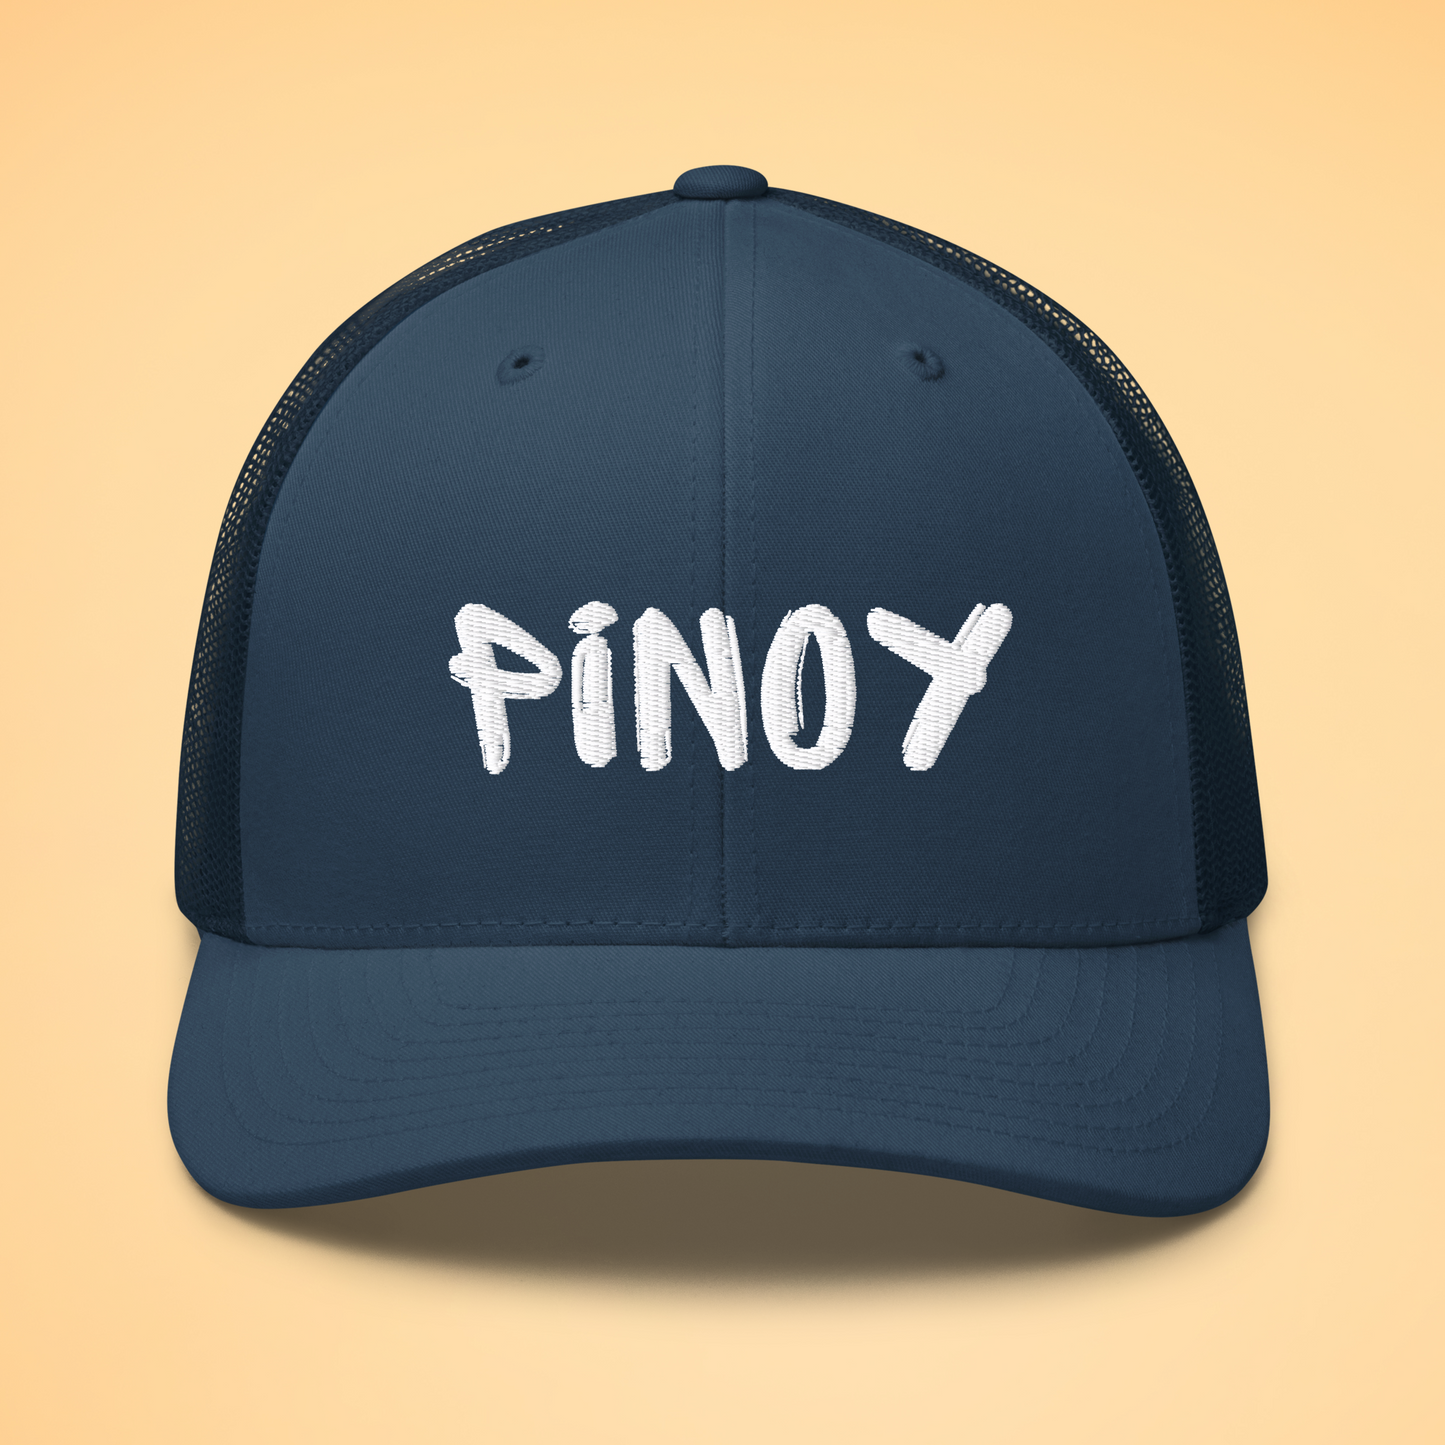 Filipino Pinoy Embroidered Mesh Back Trucker Cap in Navy